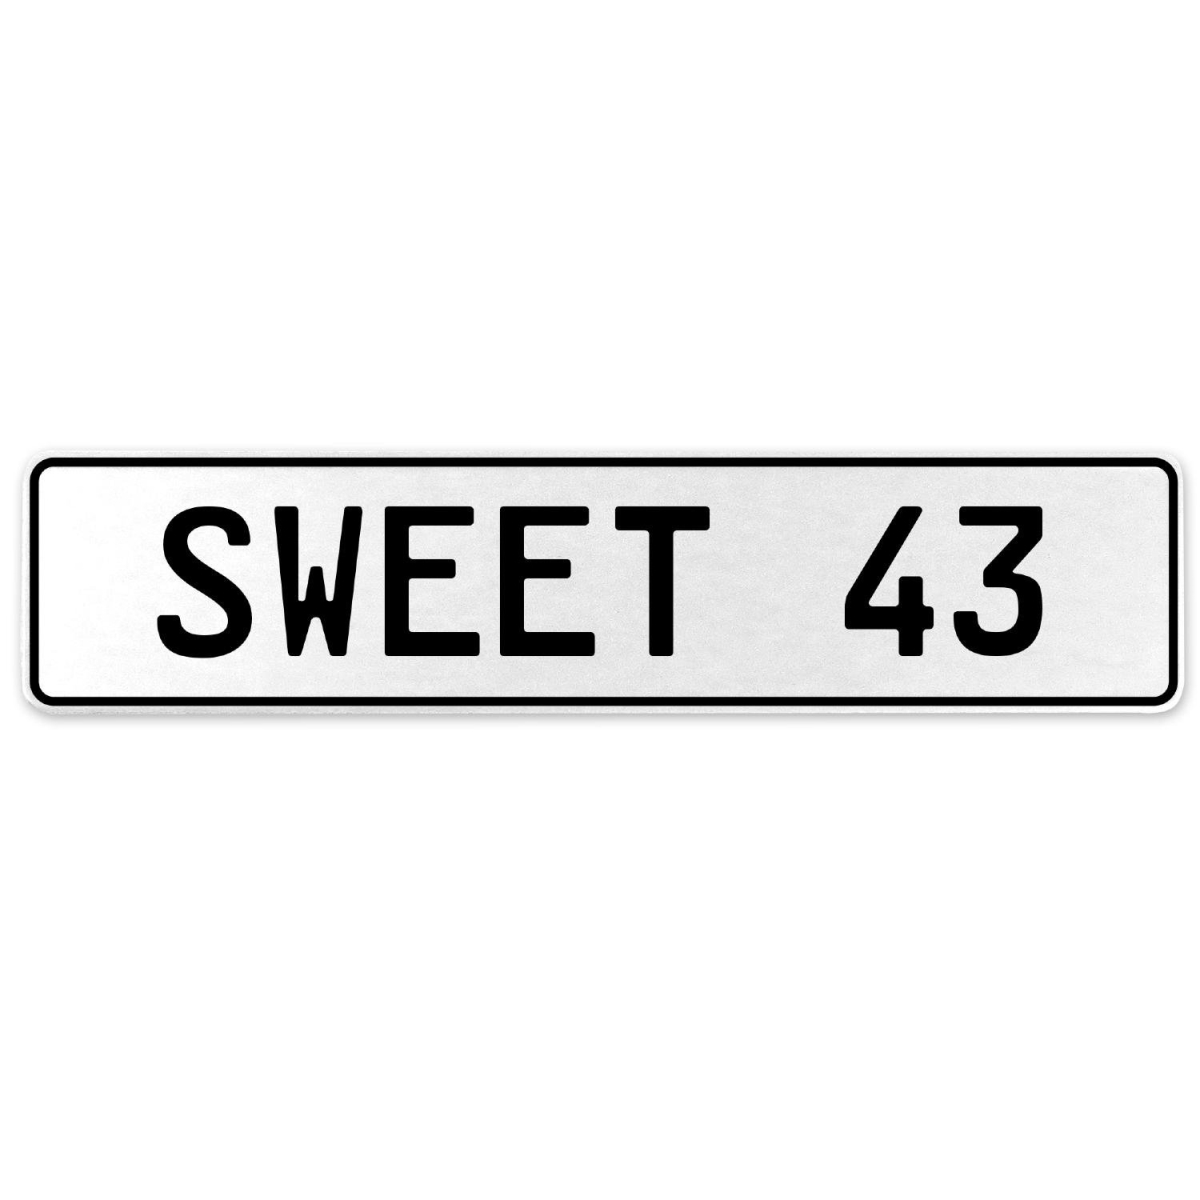 554145 Sweet 43 - White Aluminum Street Sign Mancave Euro Plate Name Door Sign Wall